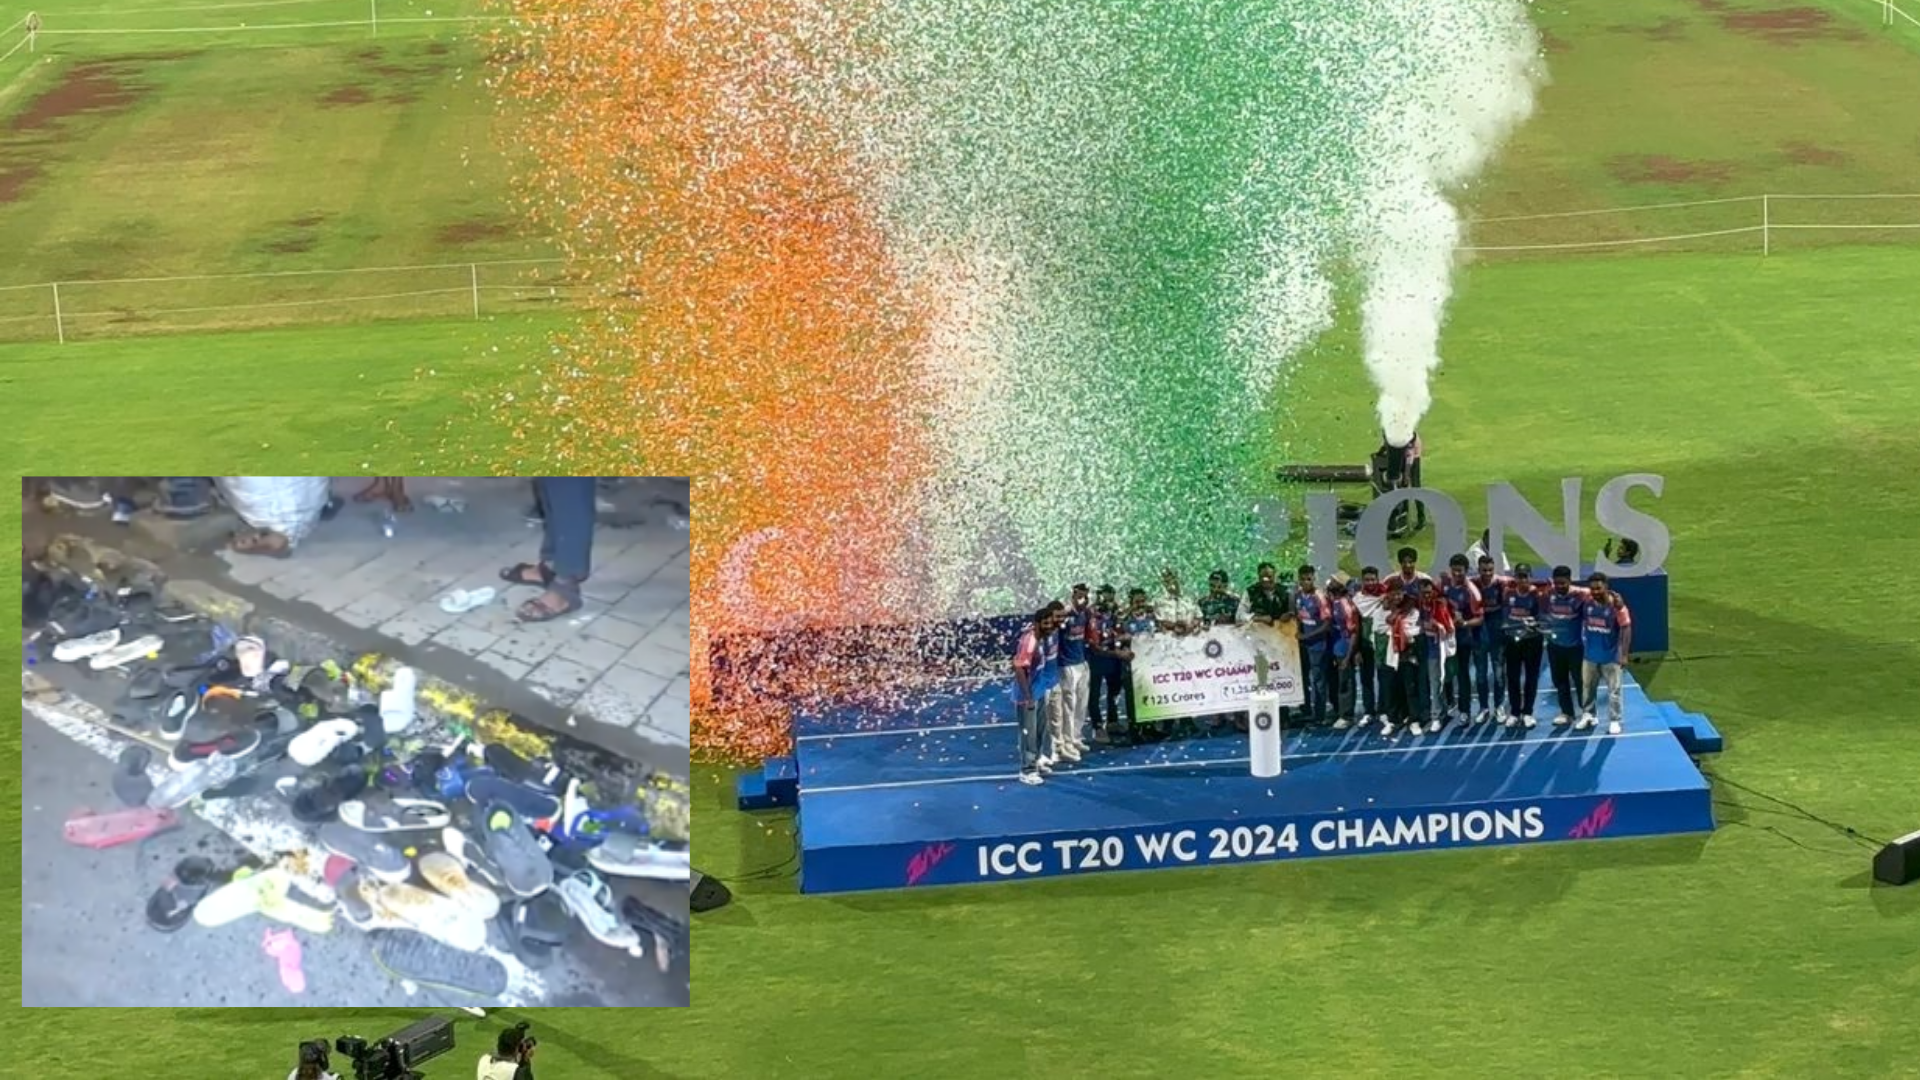 Aftereffects Of Team India’s Massive Victory Parade: Shoes Scattered, Damaged Cars, Several Injured